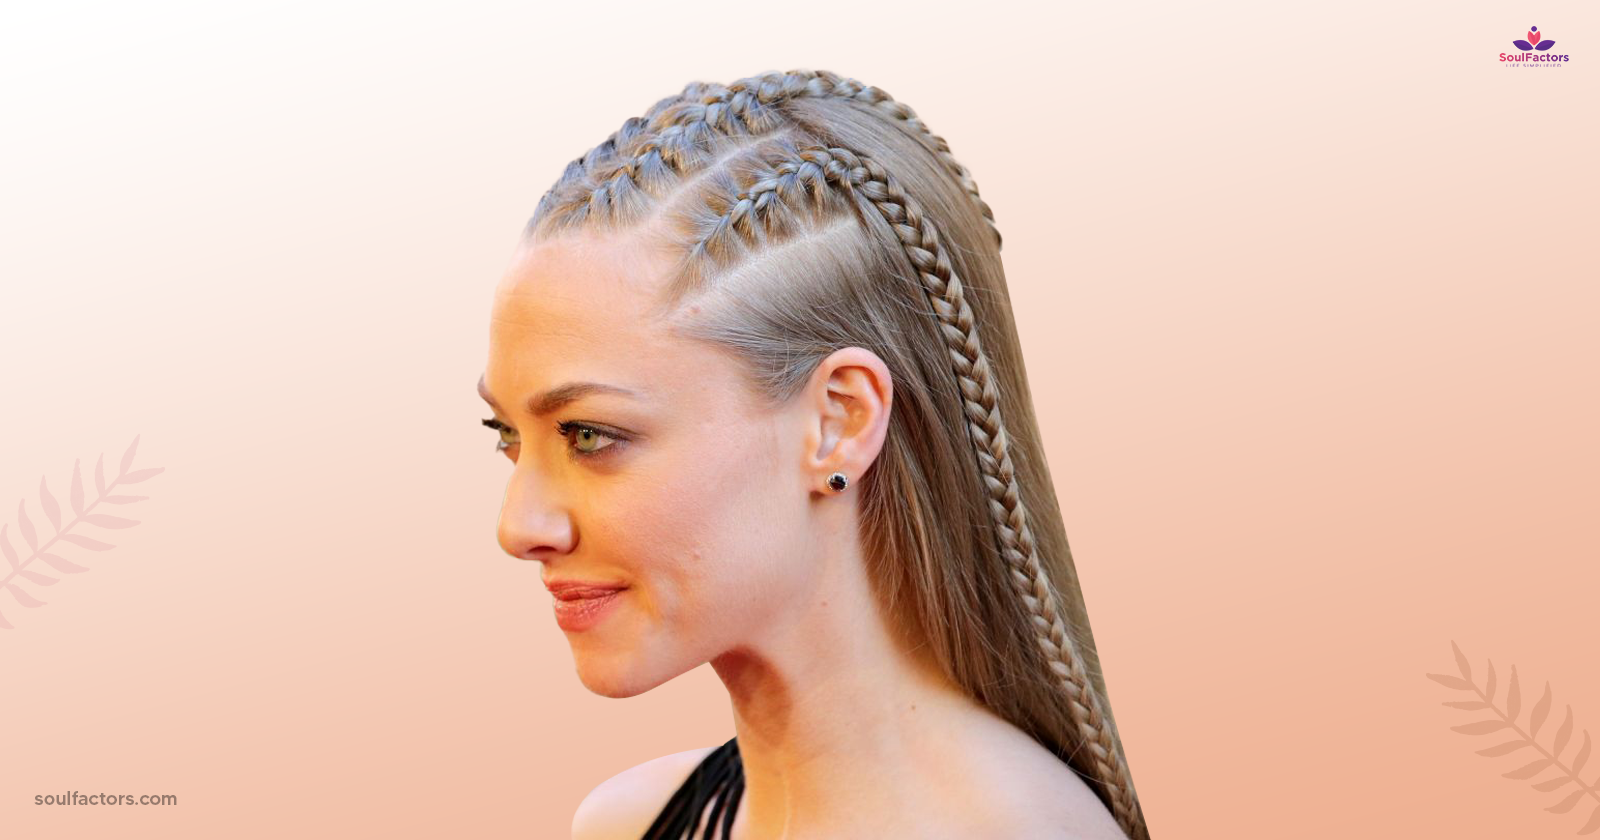 Y2K Hairstyles Nostalgic Trends Making a Modern Comeback